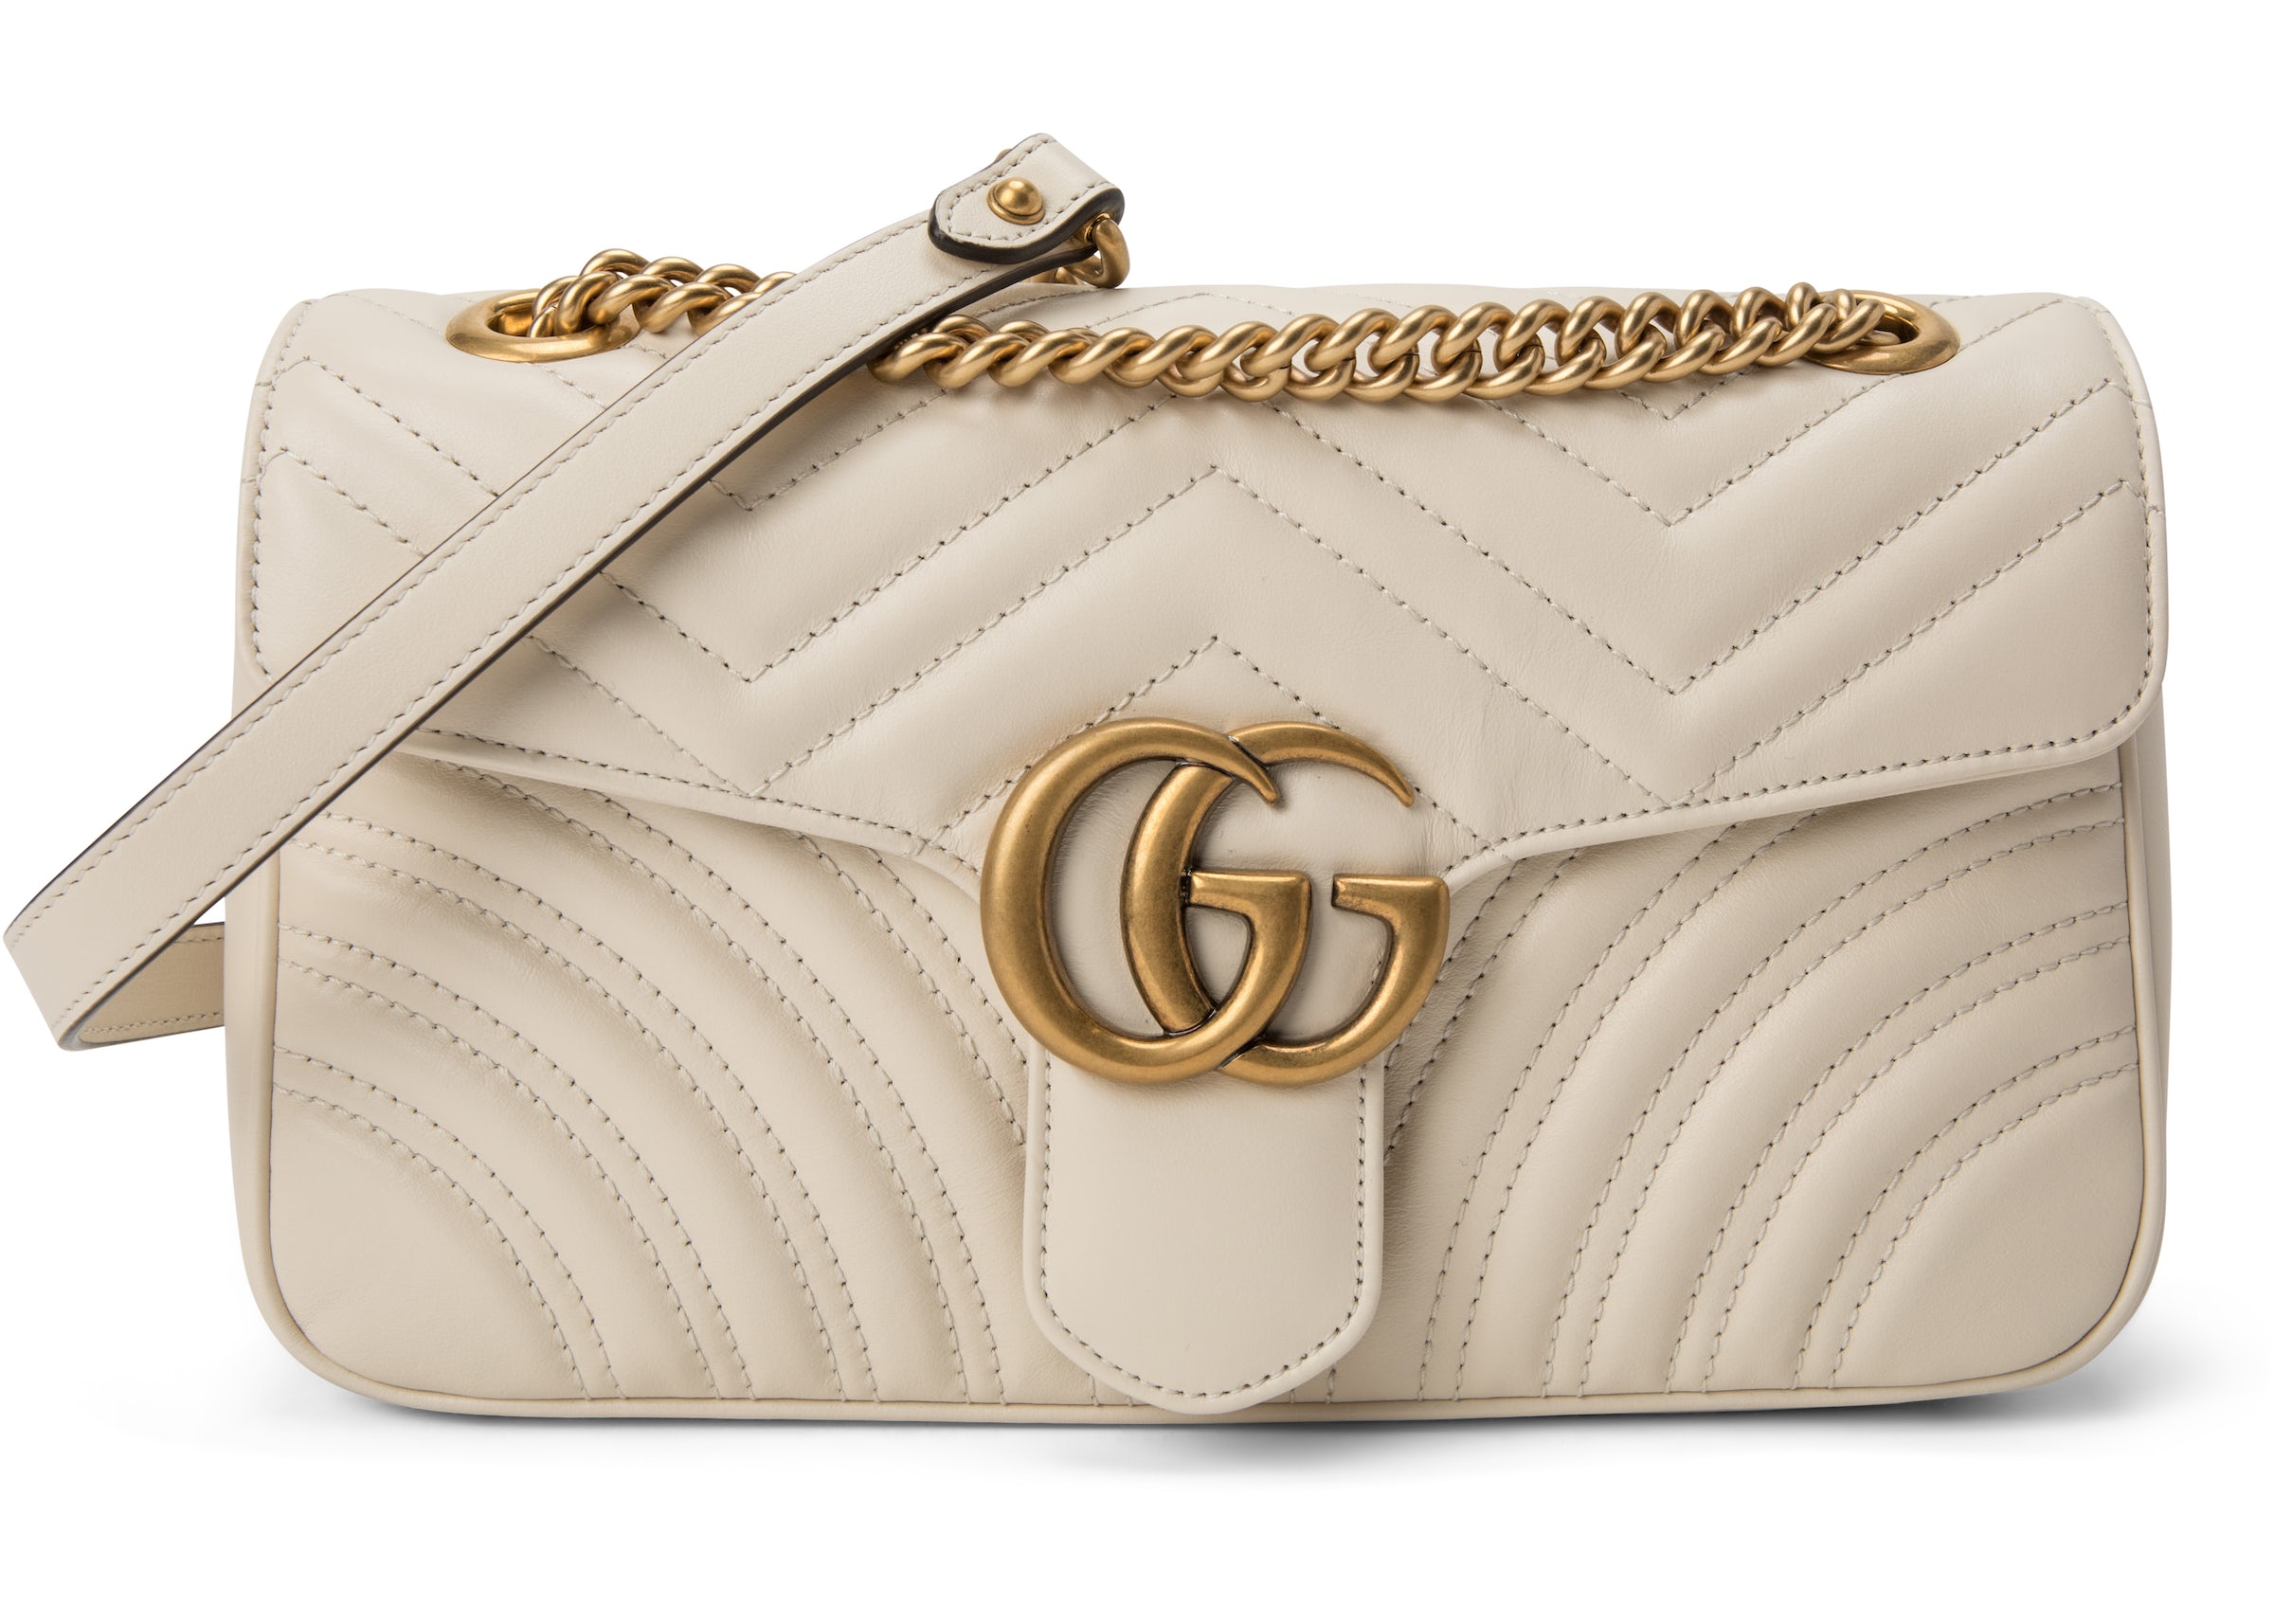 Gucci GG Marmont Small Matelasse Bag White in Leather with ANTIQUE